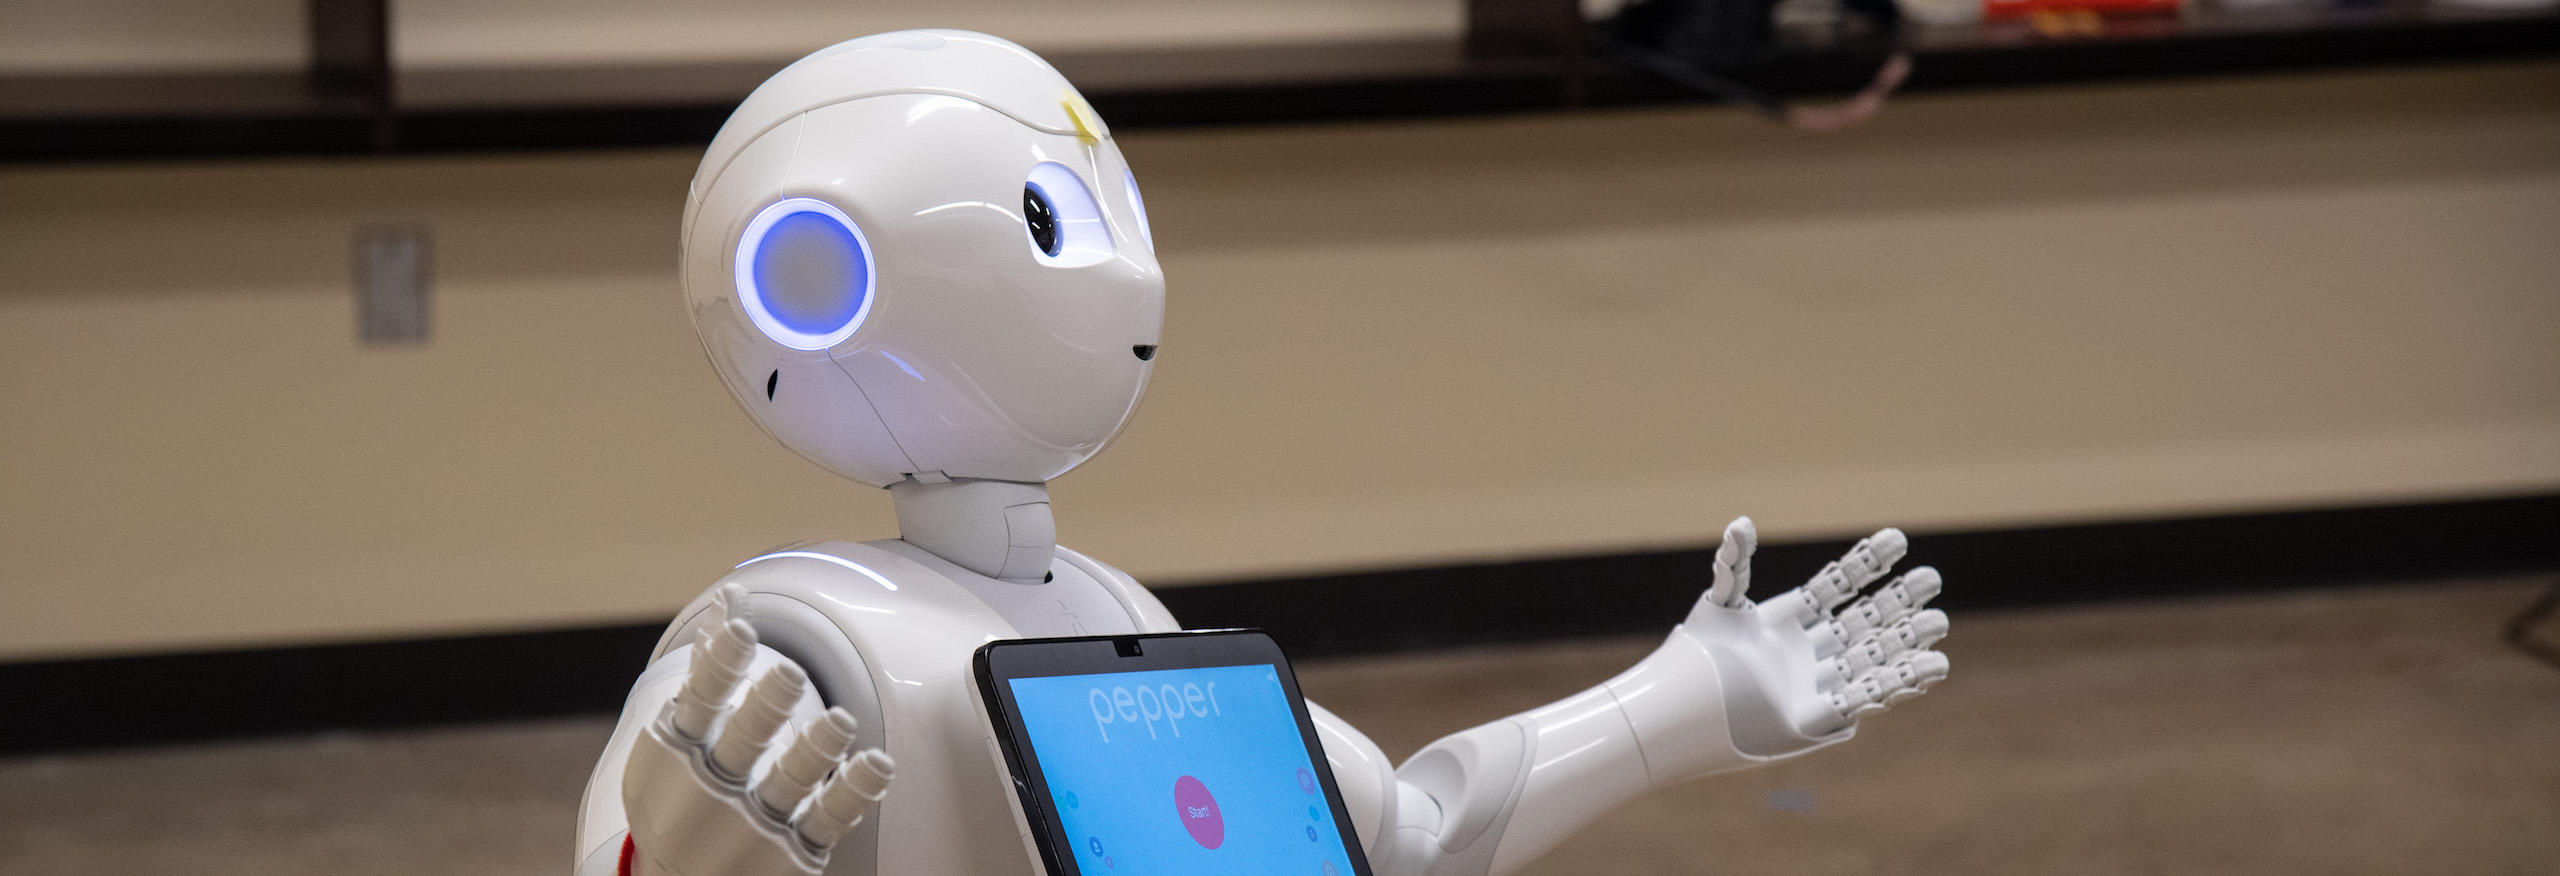 Pepper the robot sings nursery rhymes during a study